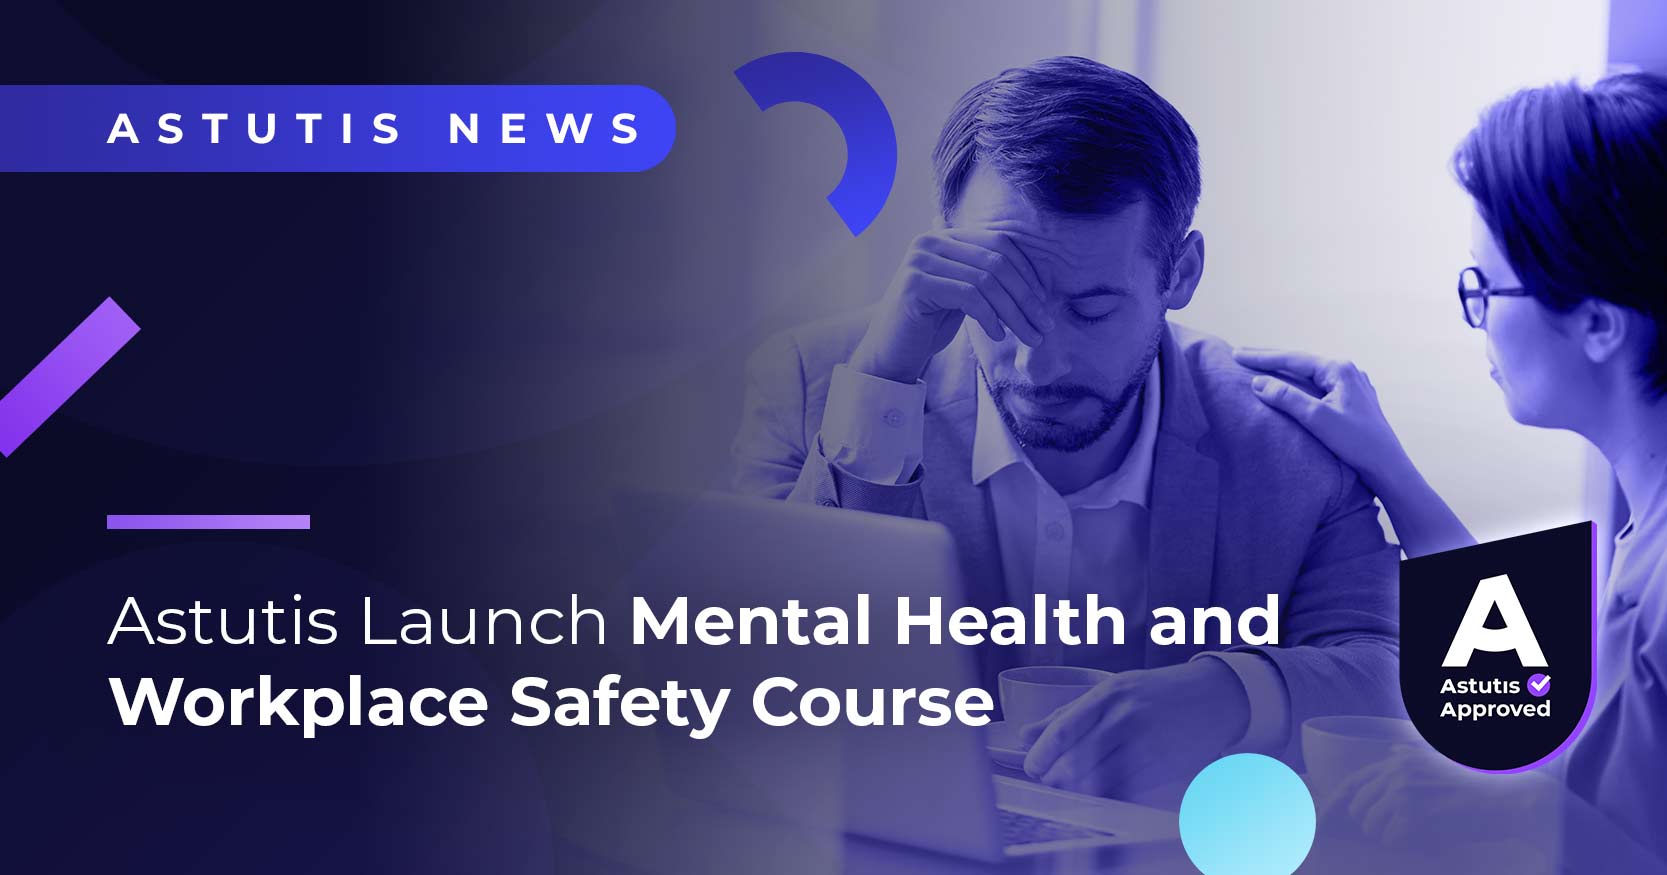 Astutis Launch Mental Health and Workplace Safety Course Image